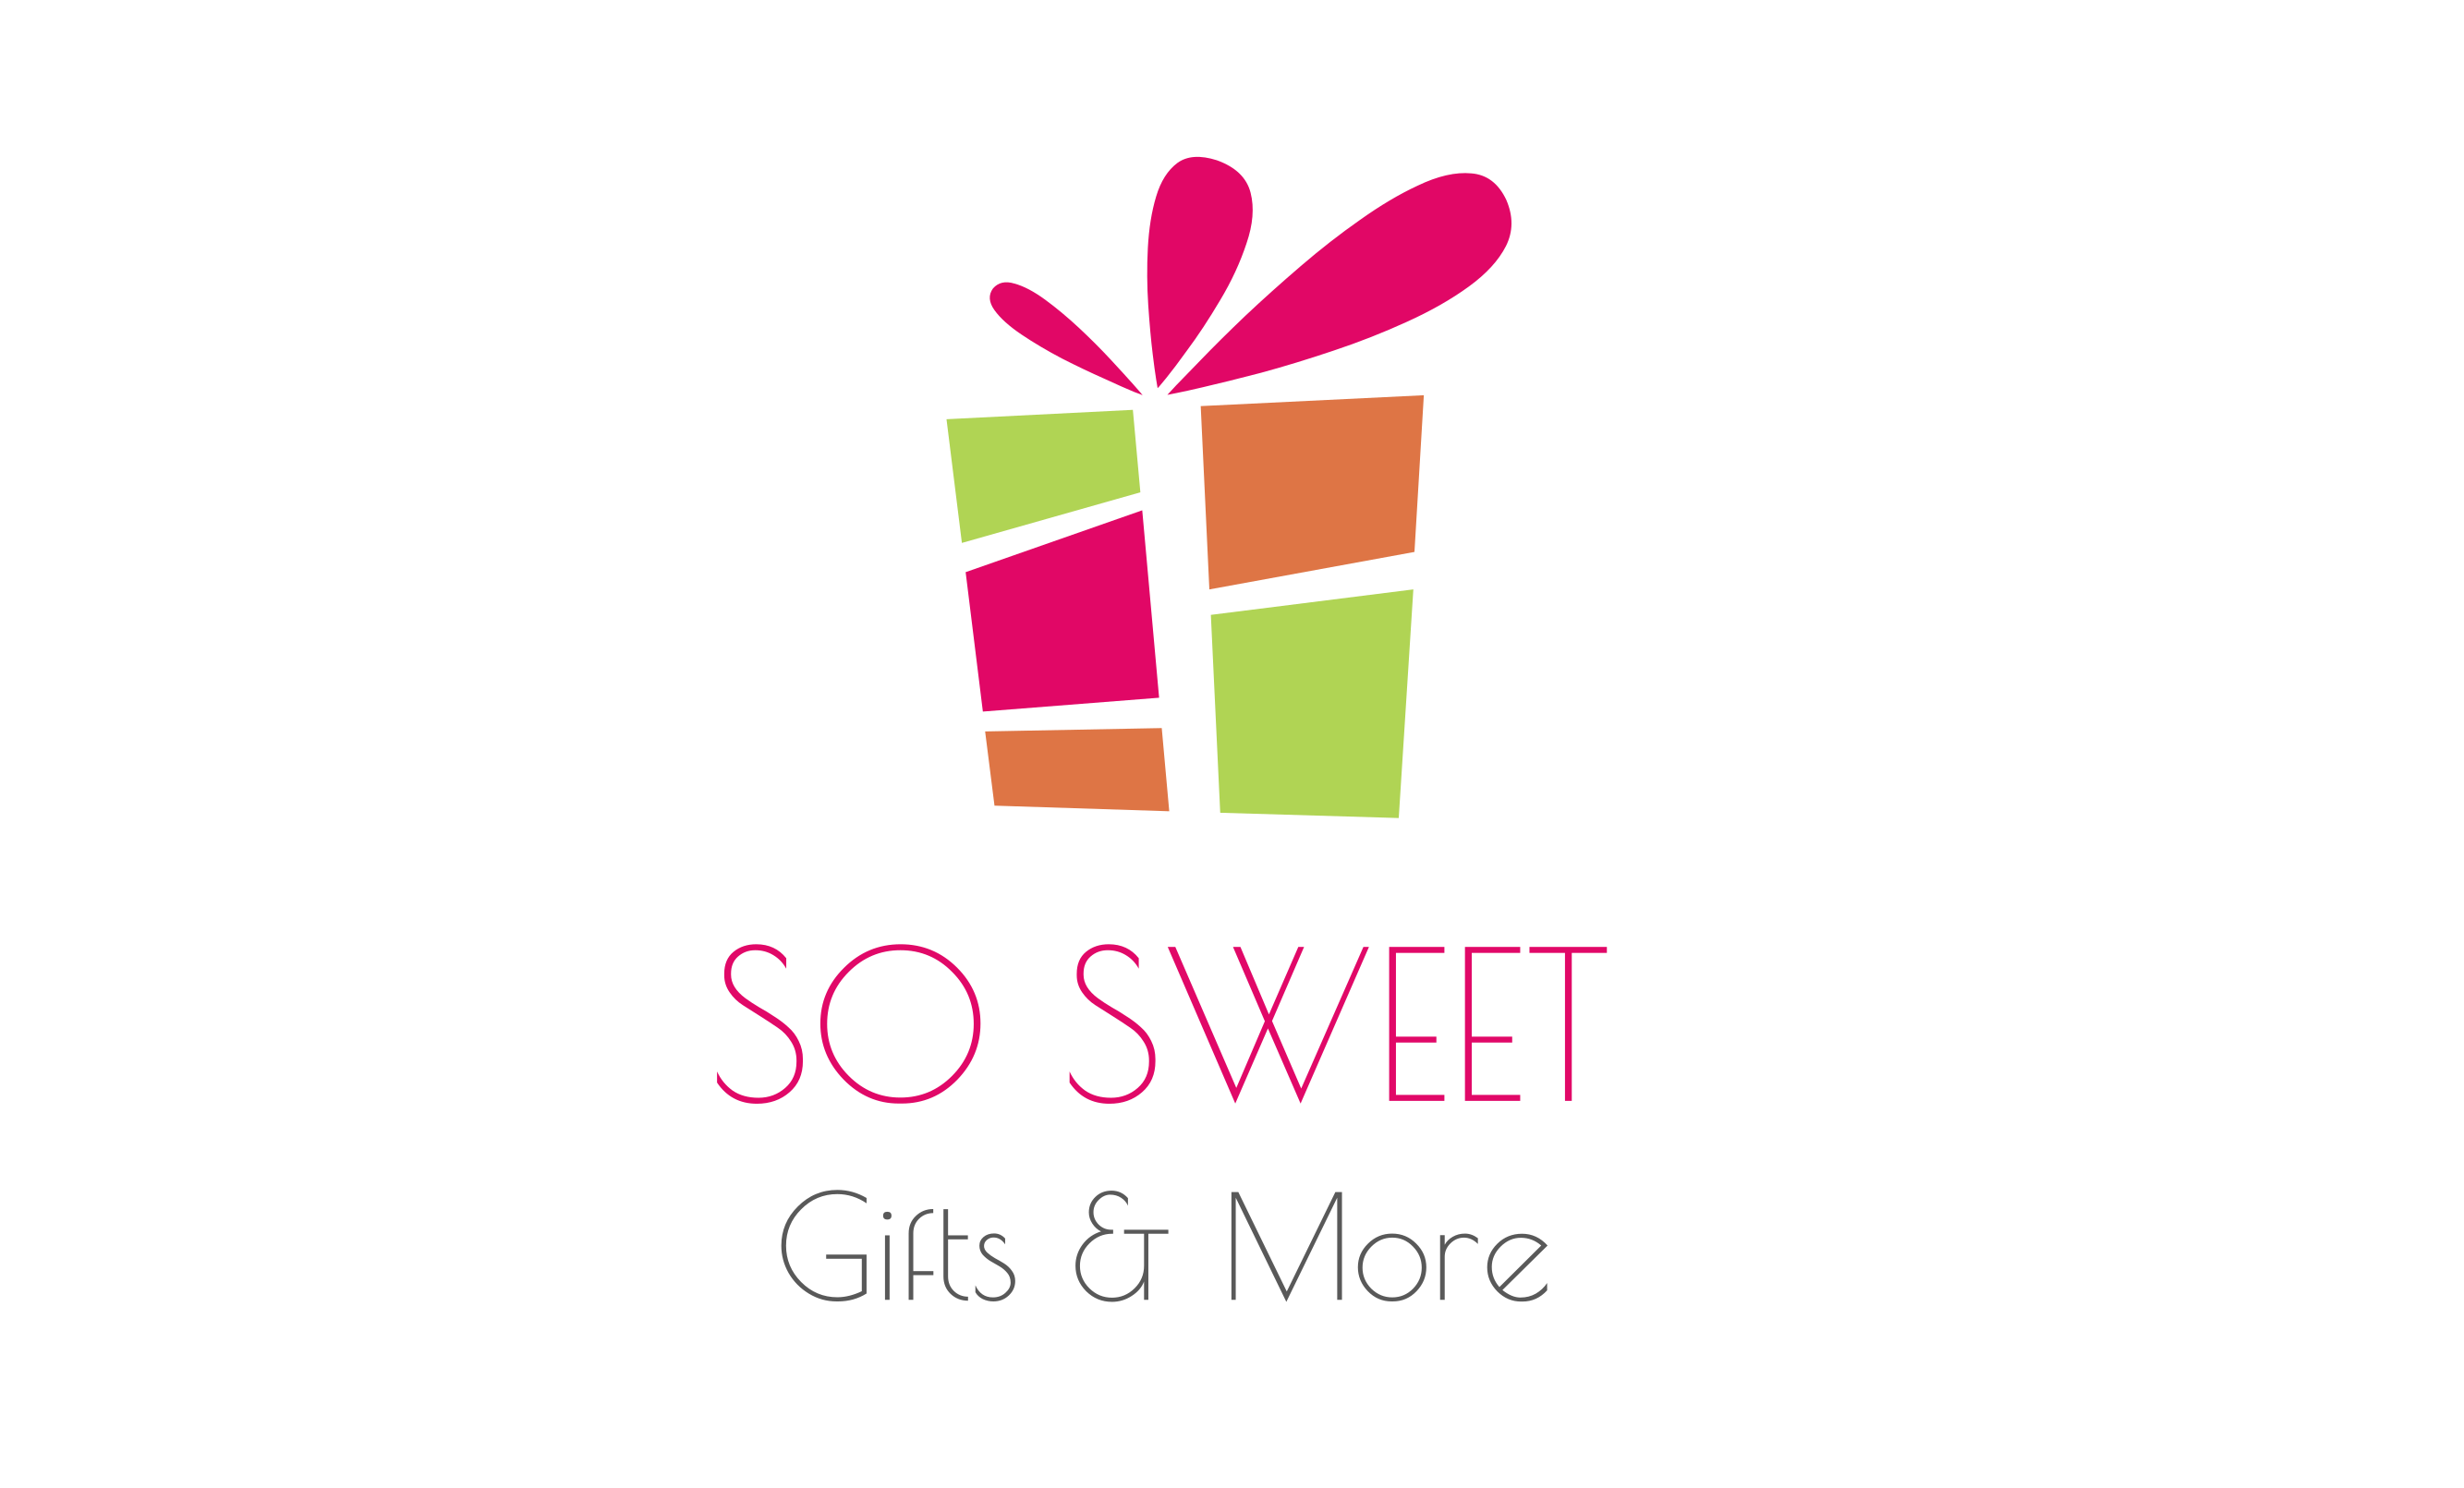 So Sweet Gifts & More